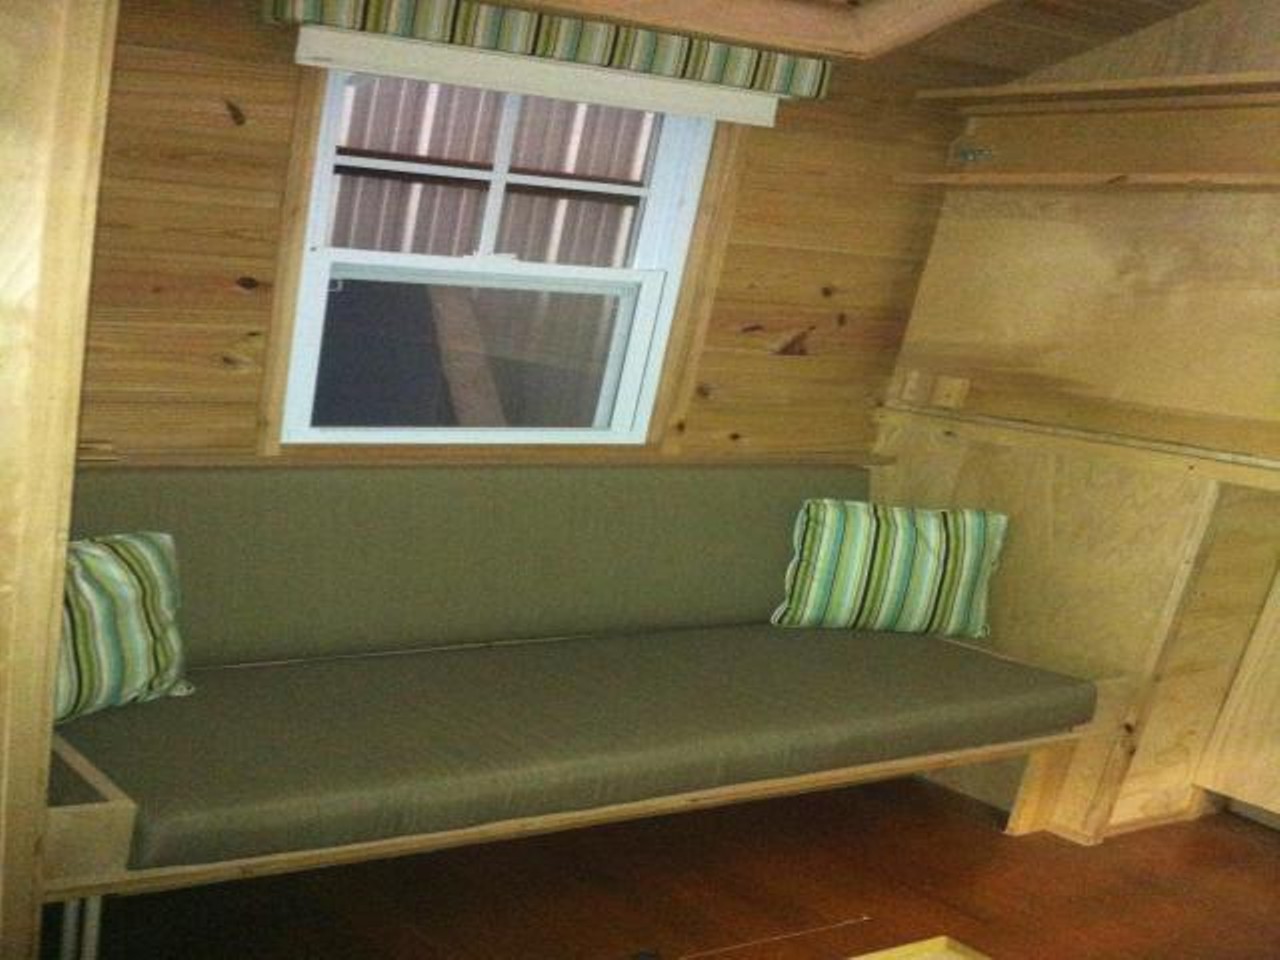 Aqua Tiny House
Location: Eustis
Price: $15000
Size: 70 sq ft
The couch can double as a guest bed.